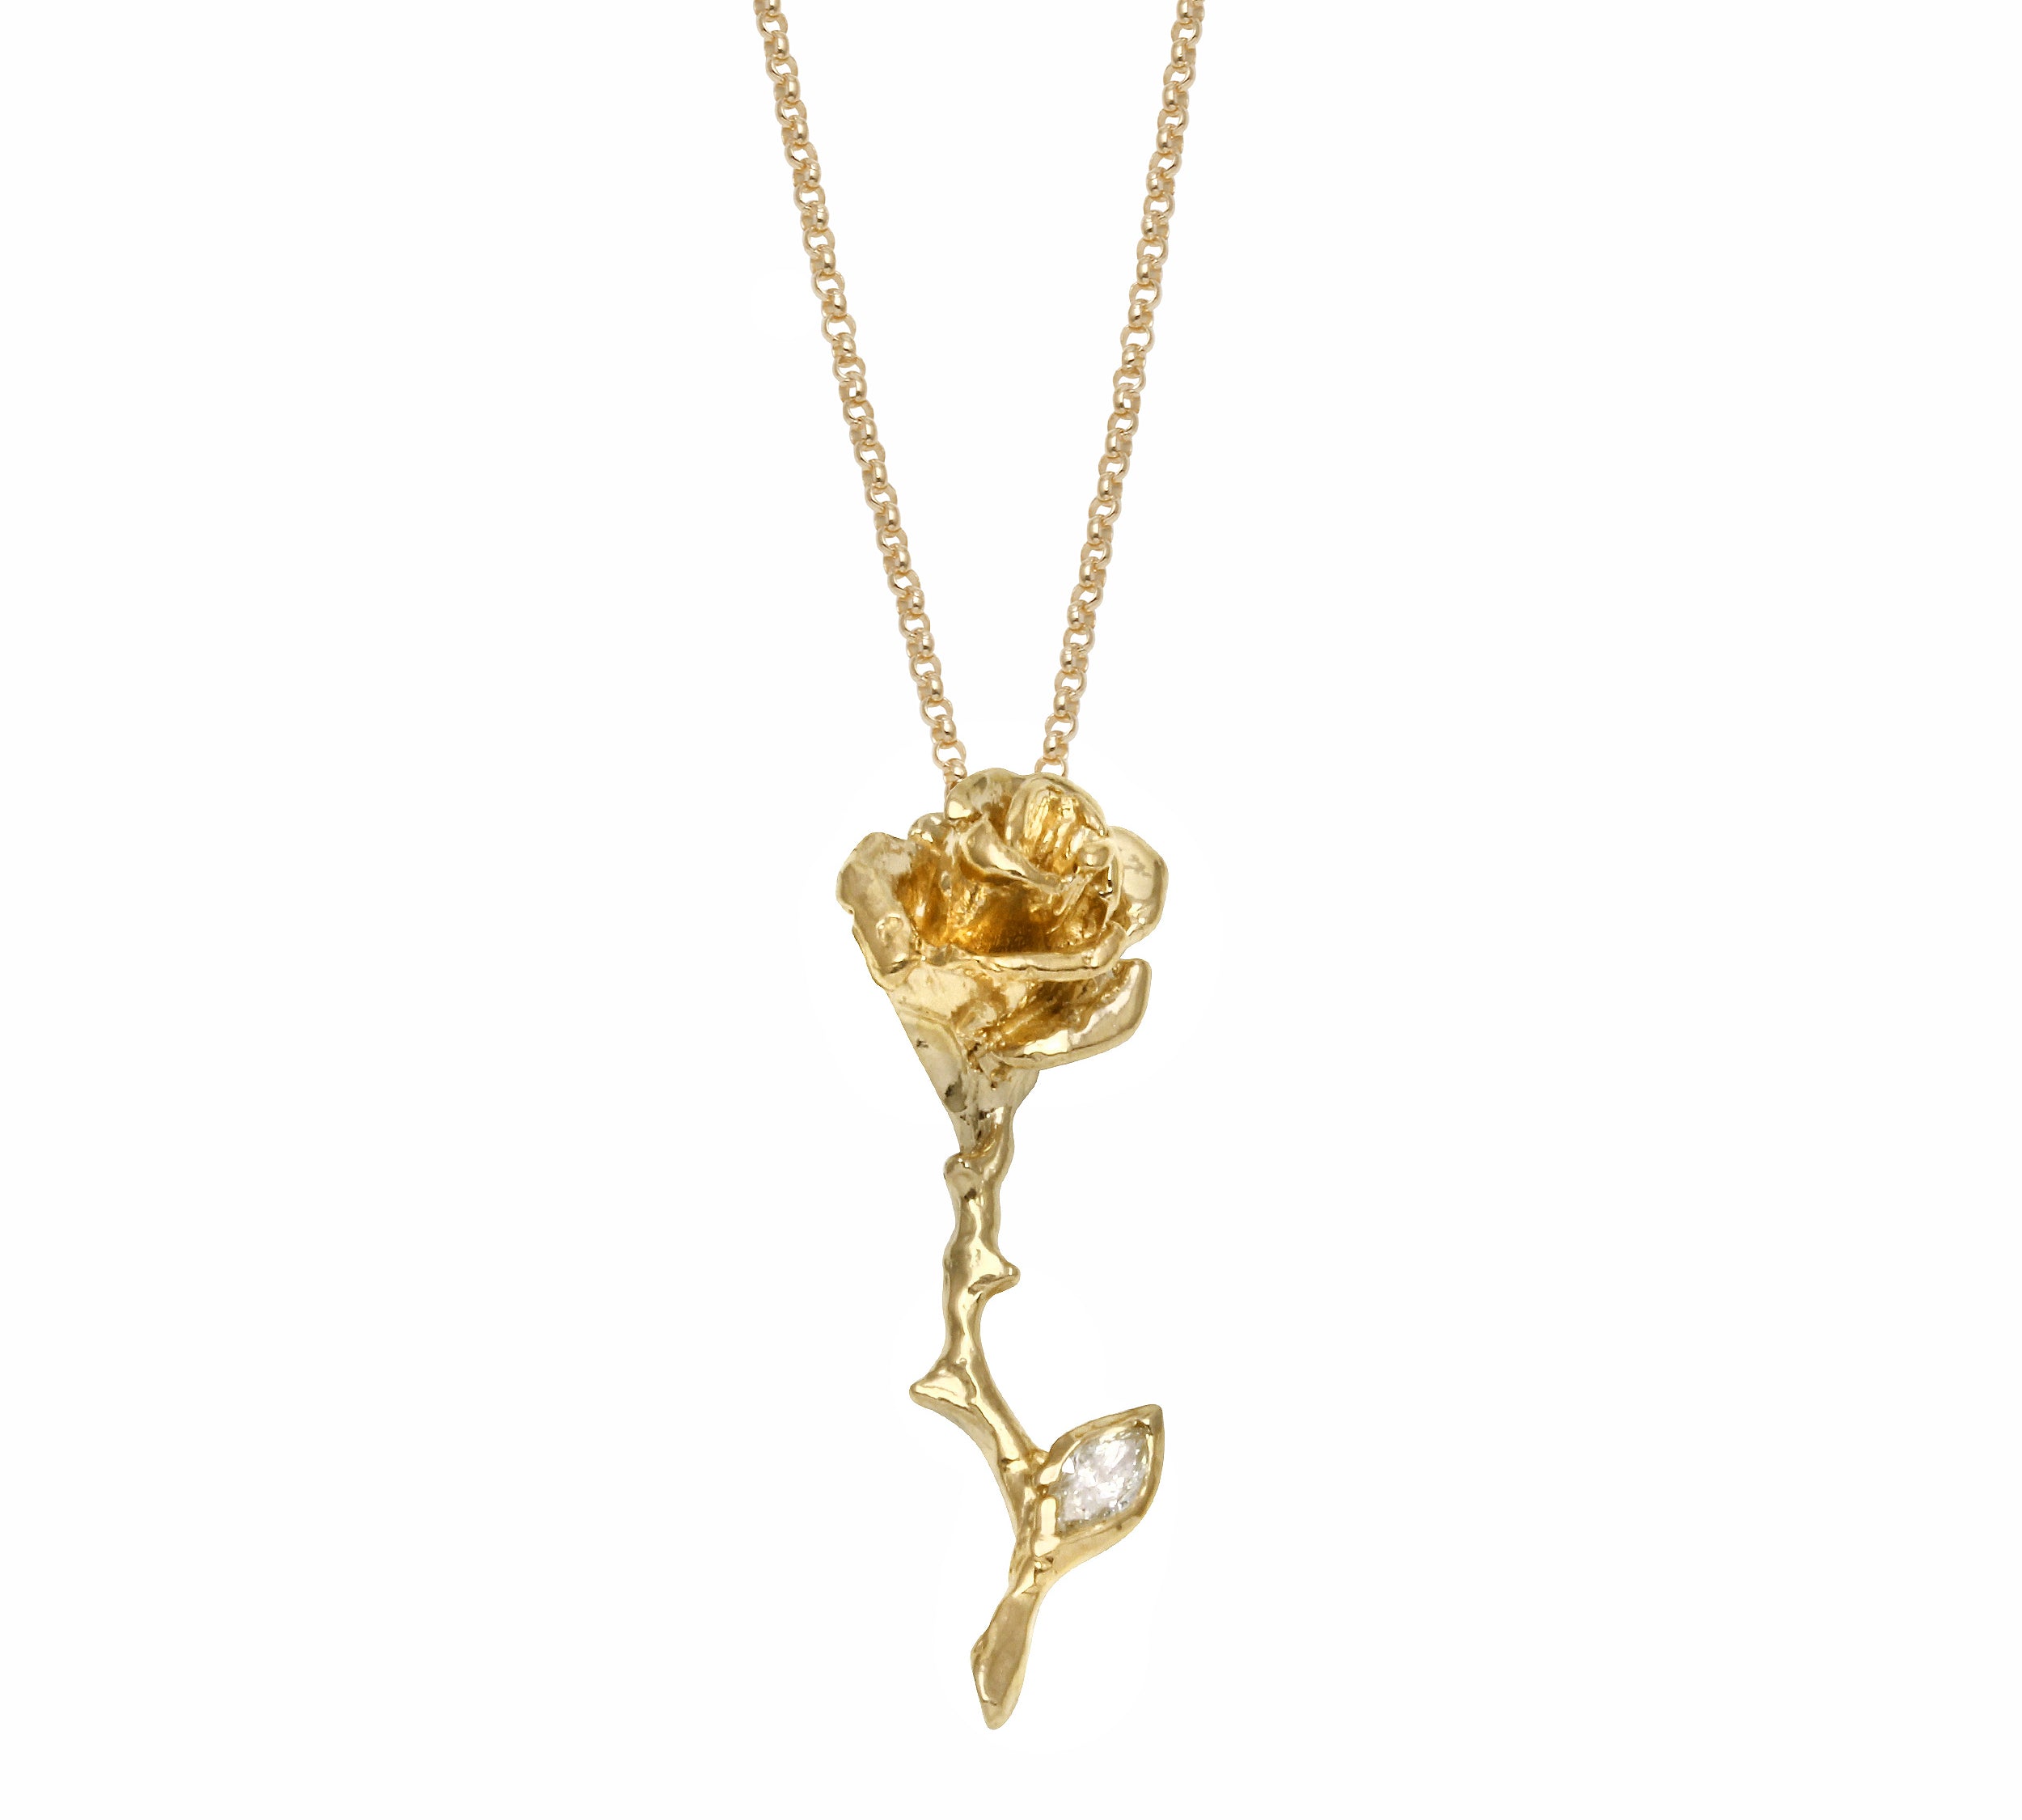 Love & Beauty is the Rose Necklace Pendant Jaine K Designs Yellow Gold  